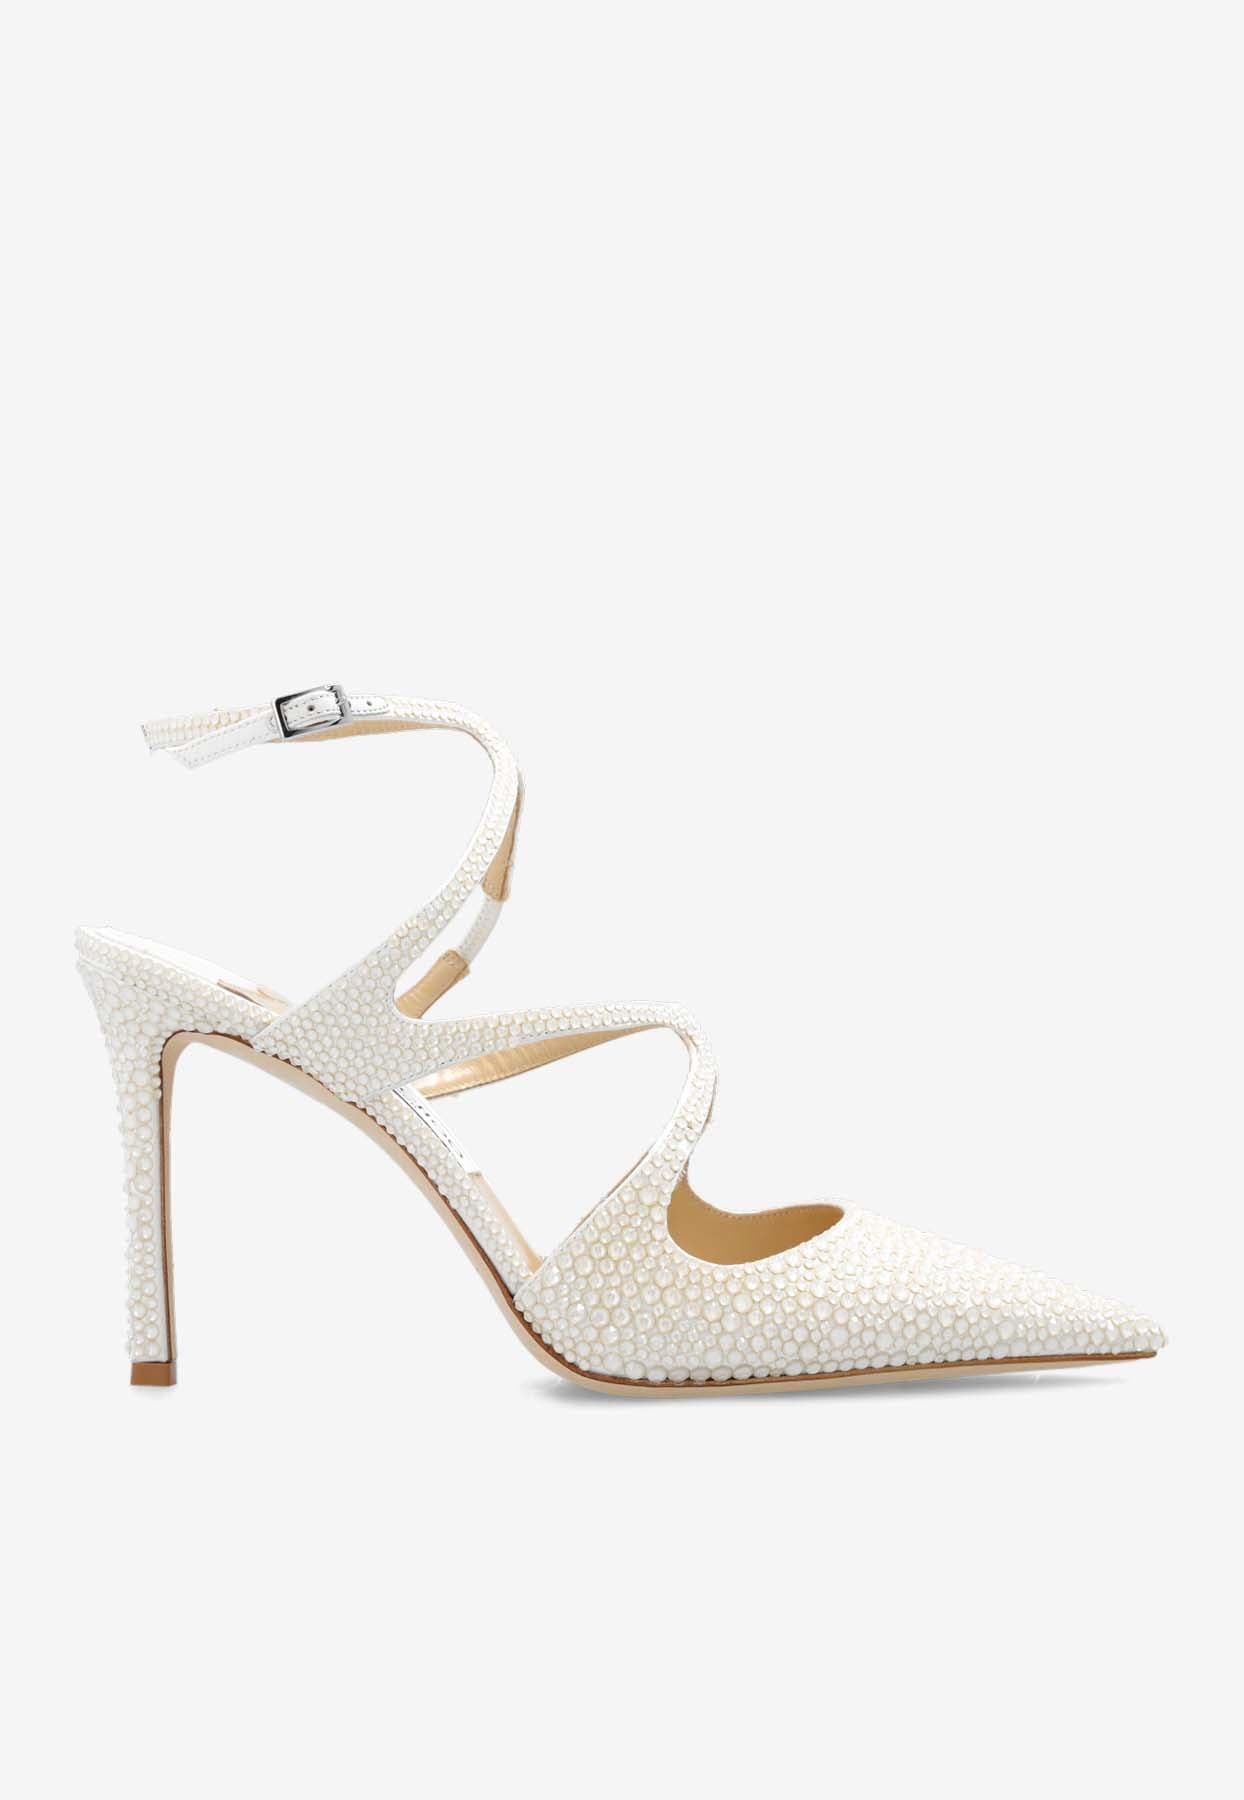 Jimmy Choo Azia 95 Crystal Satin Pumps In White